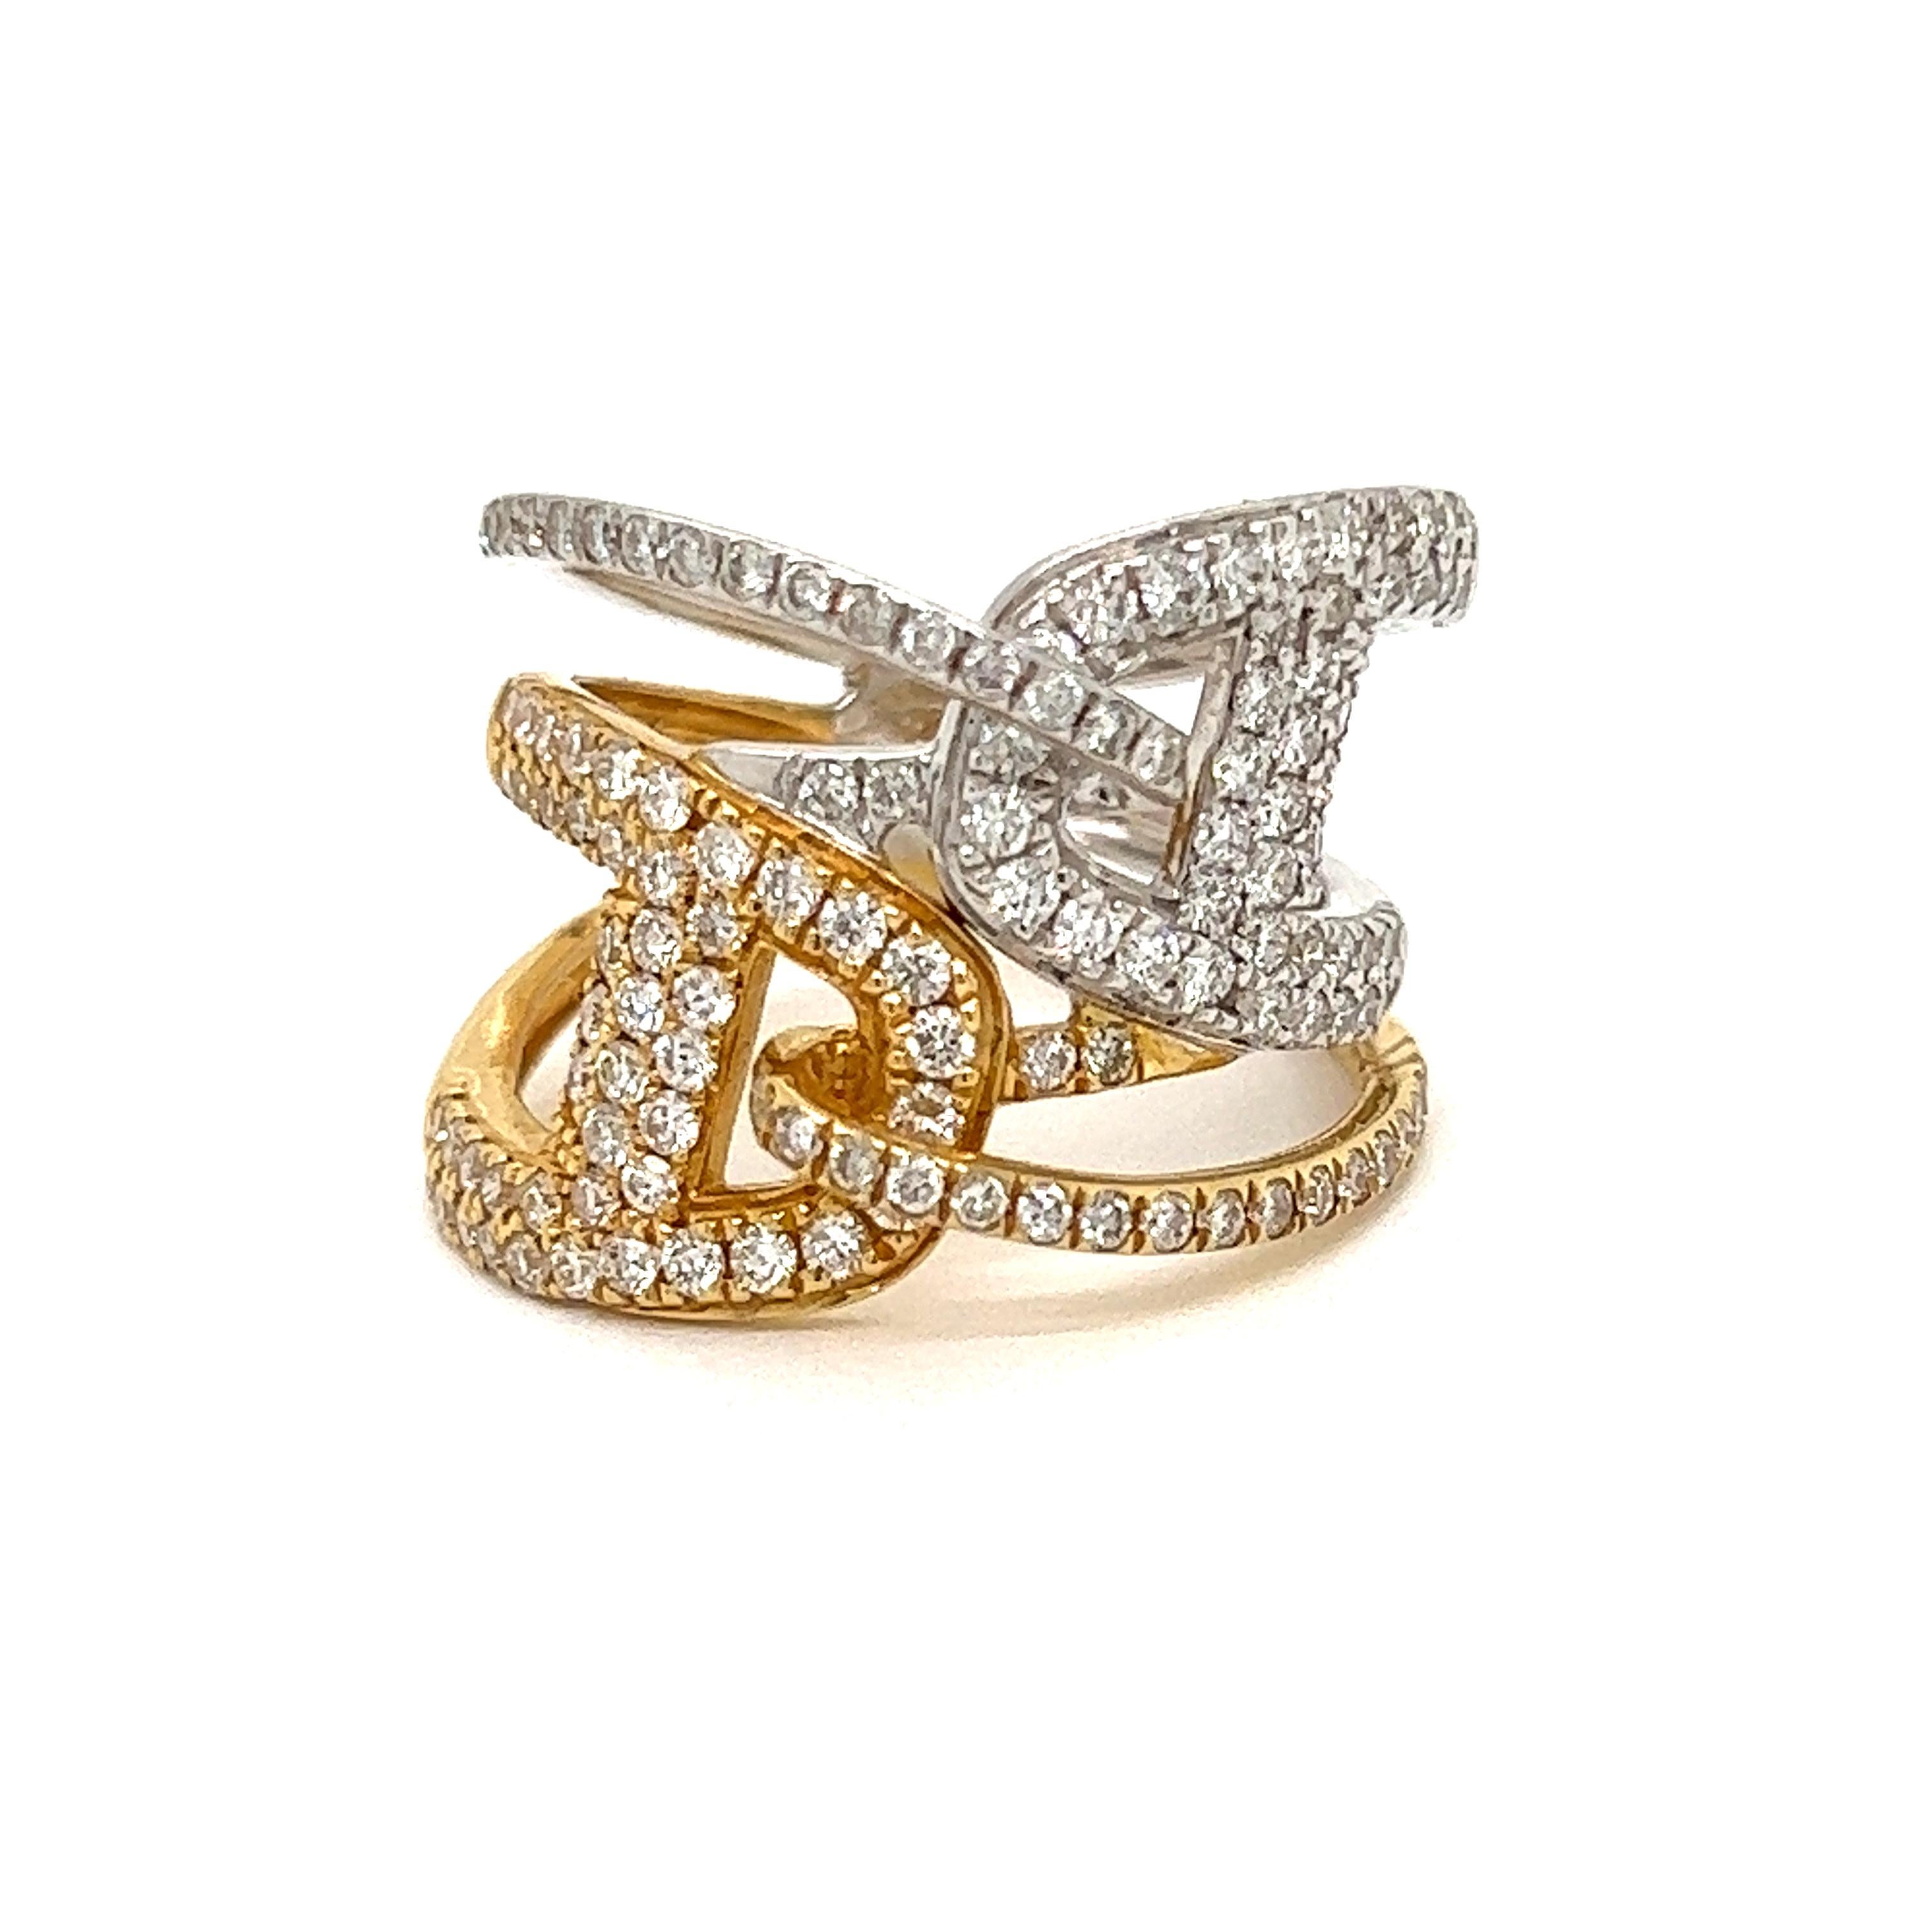 This 18k white and yellow gold ring is the perfect statement!  1.25 ctw in shimmering round diamonds, 132 diamonds total.  This outstanding ring is perfect for an anniversary gift, push present or wedding band. 6.80 grams.

This ring is a size 6 and